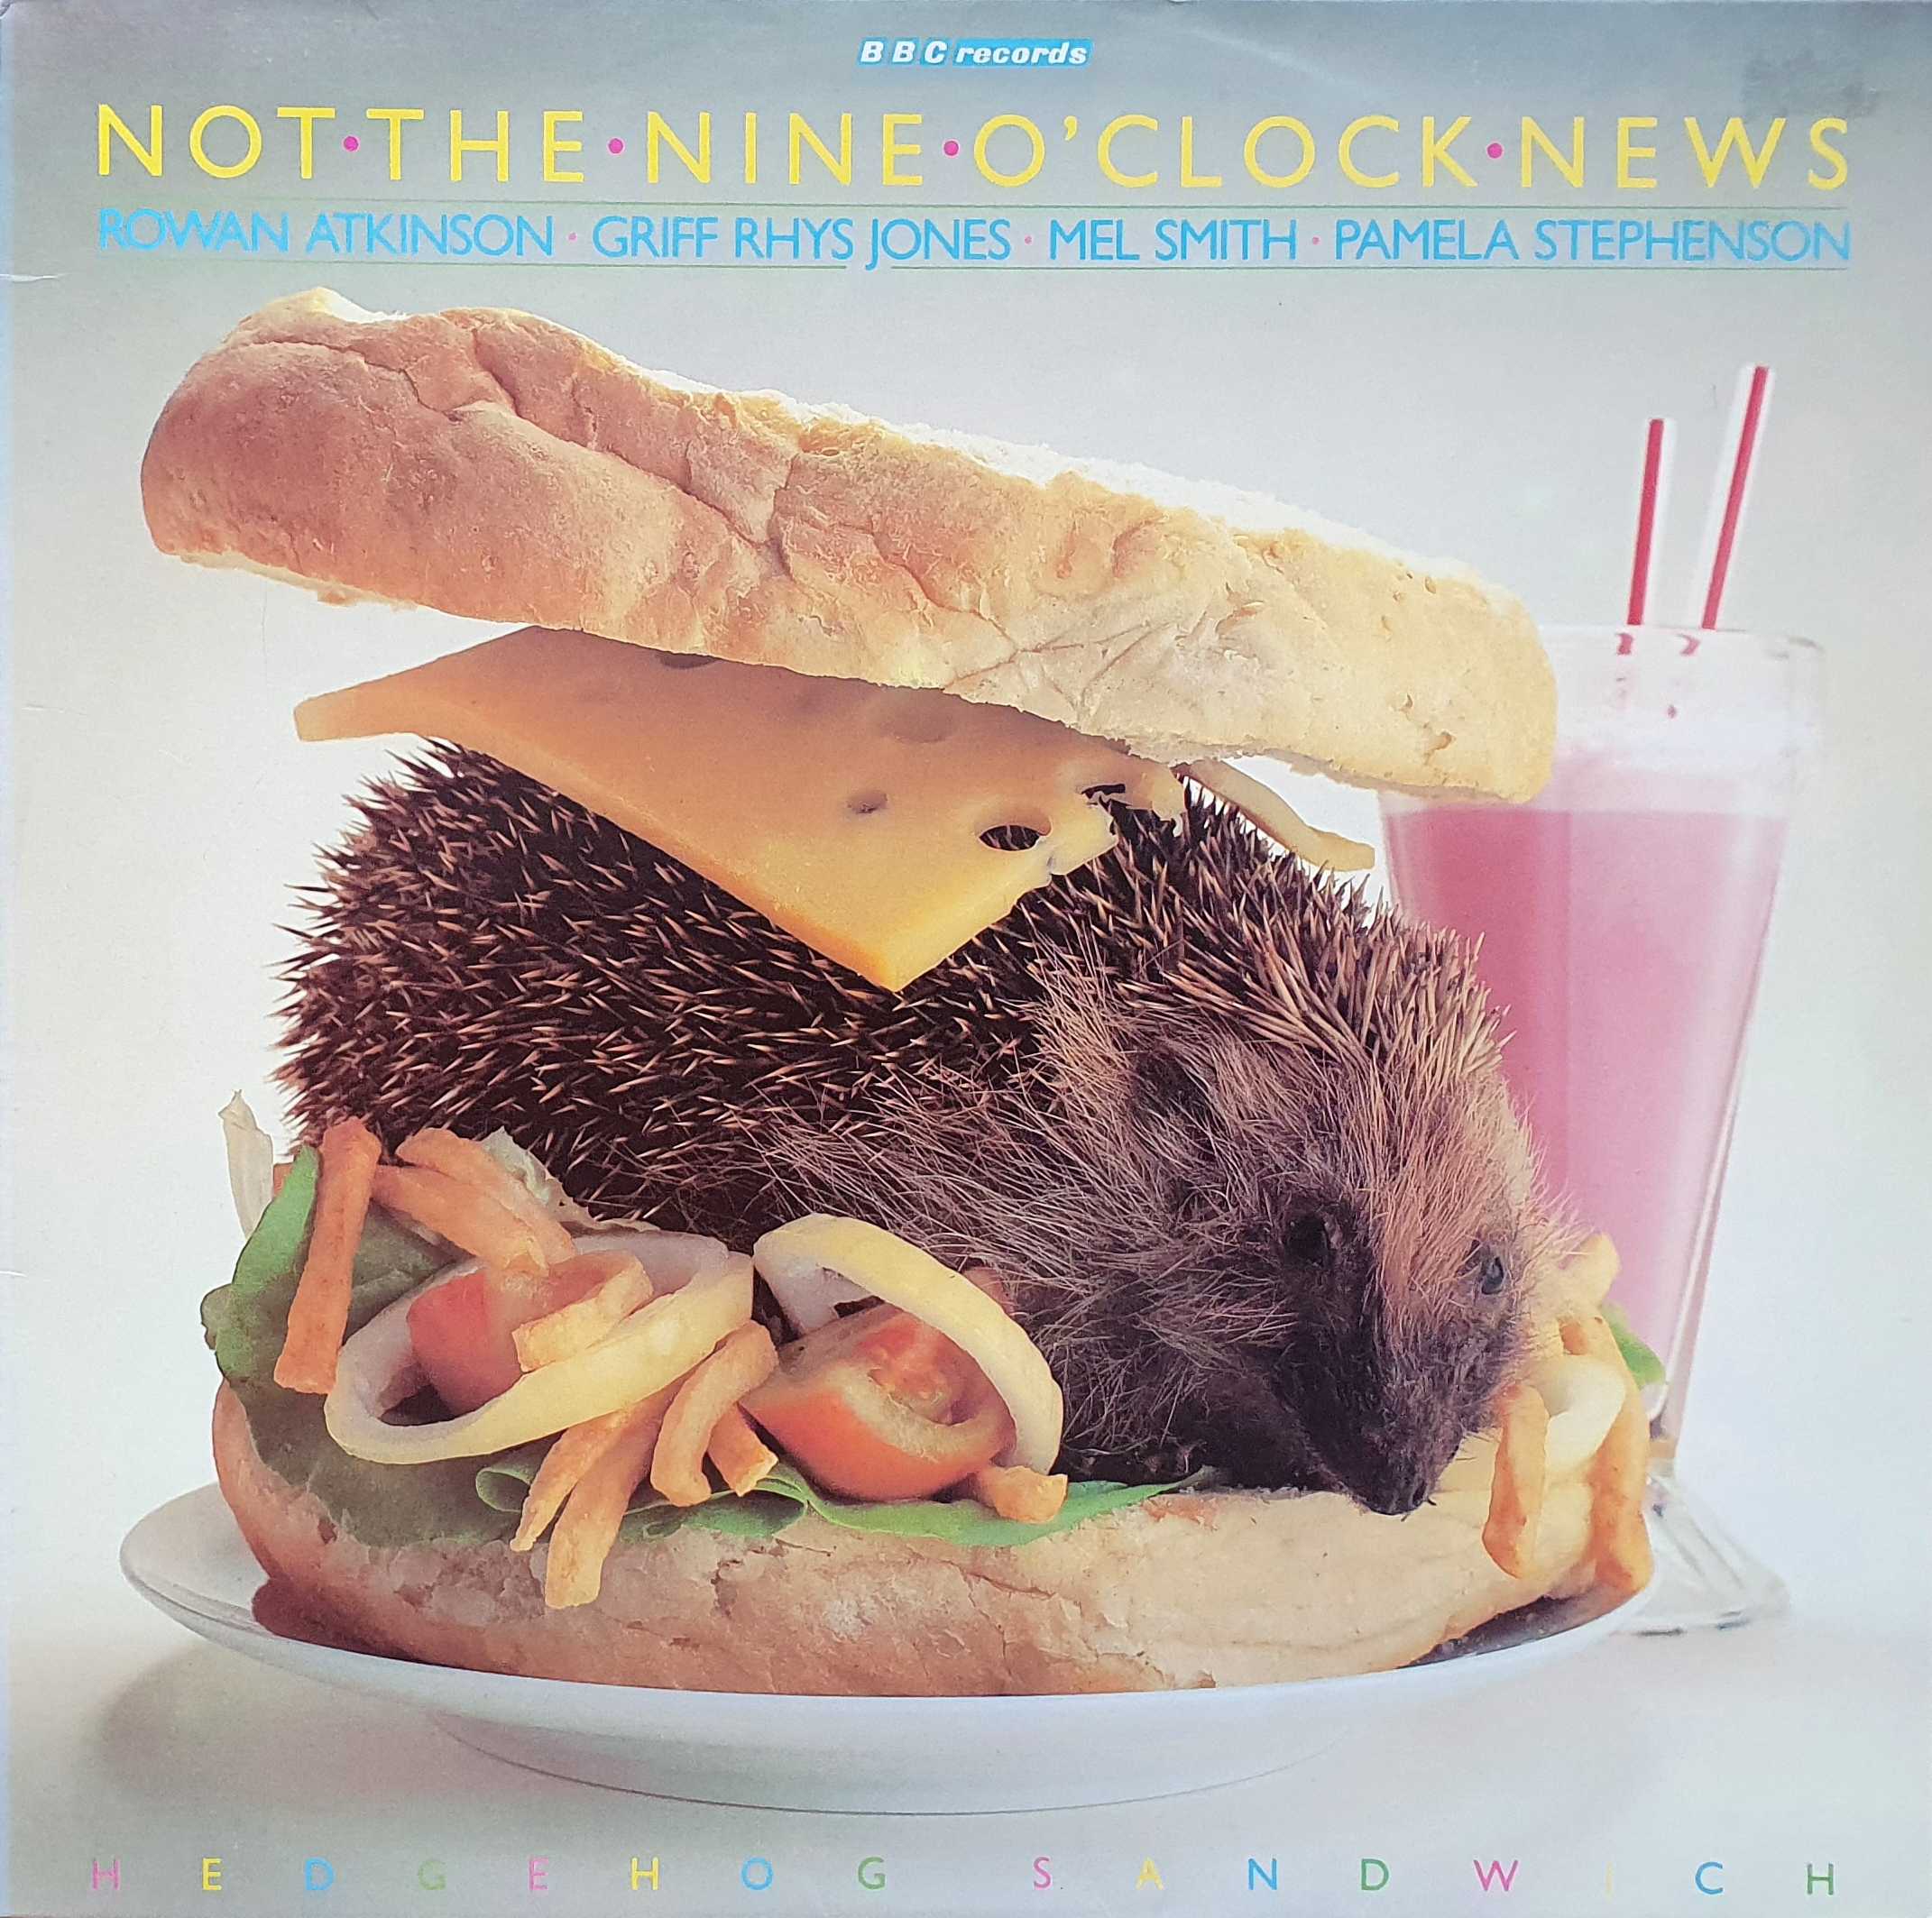 Picture of 2964 064 Hedgehog sandwich by artist Not the nine o'clock news from the BBC albums - Records and Tapes library